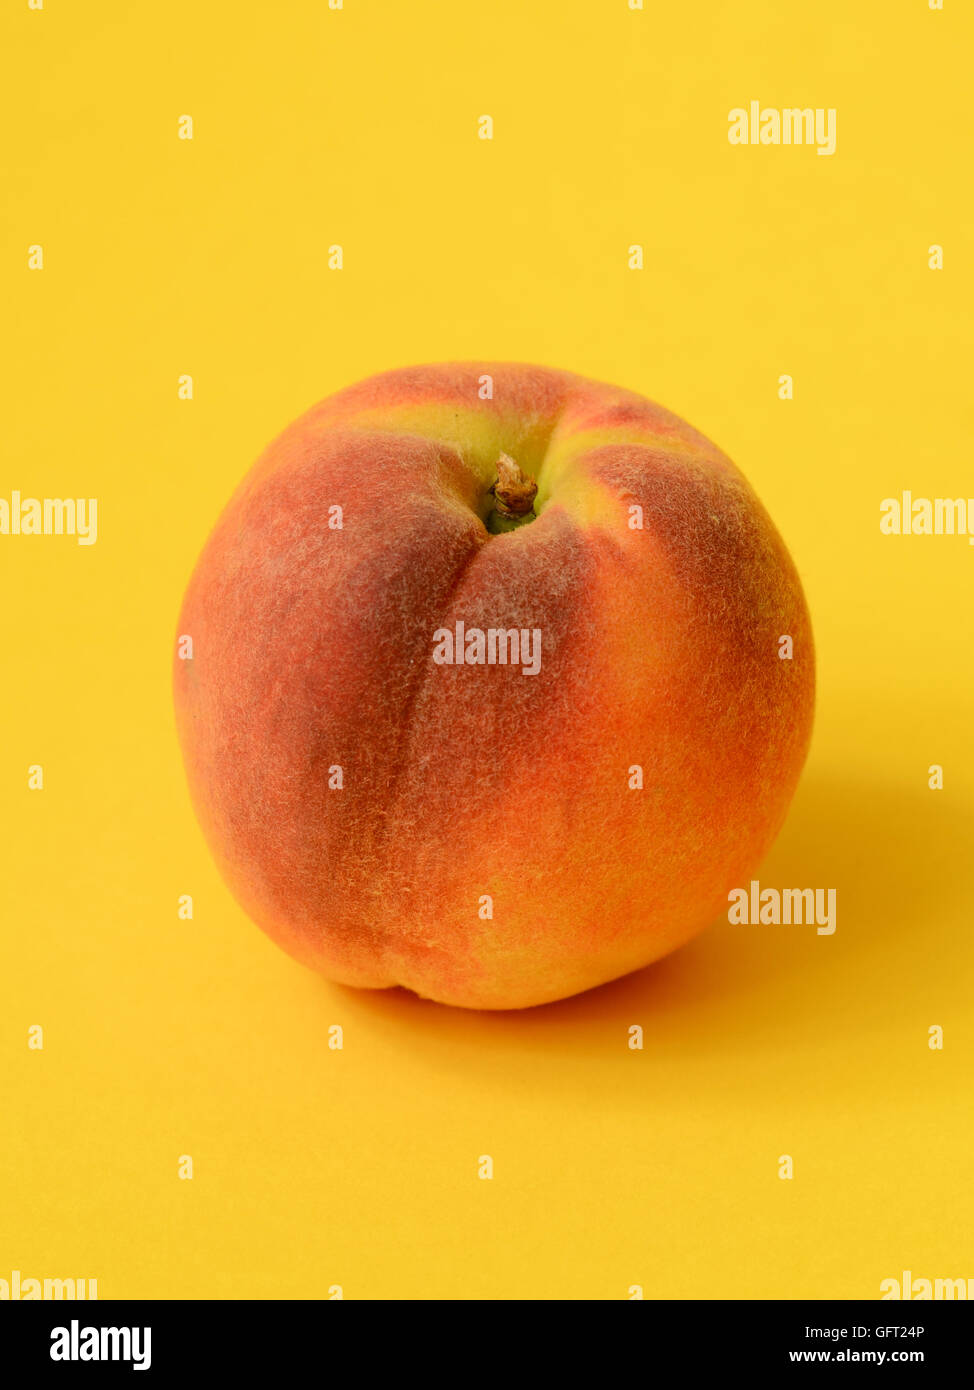 One ripe peach on a yellow background Stock Photo